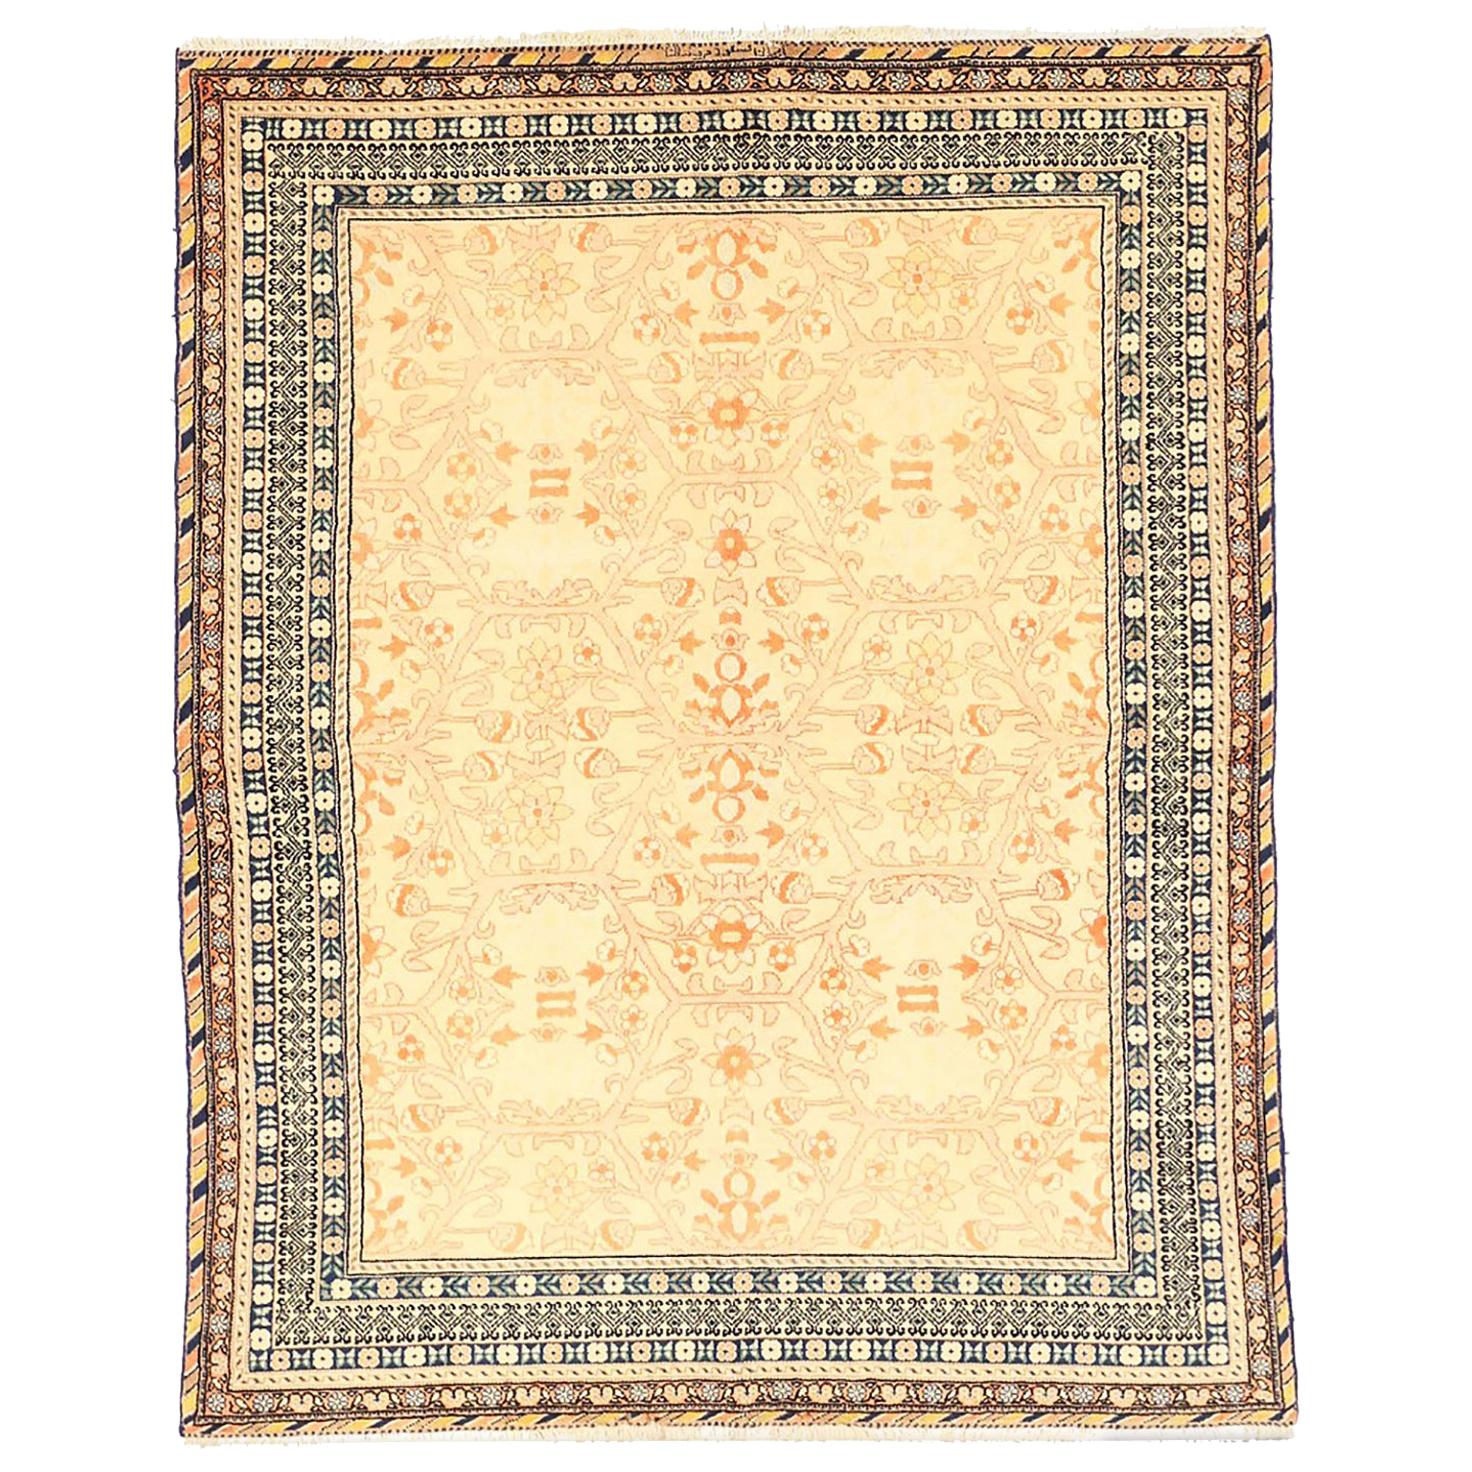 Antique Persian Bakhtiar Rug with Brown and Pink Floral Details on Ivory Field